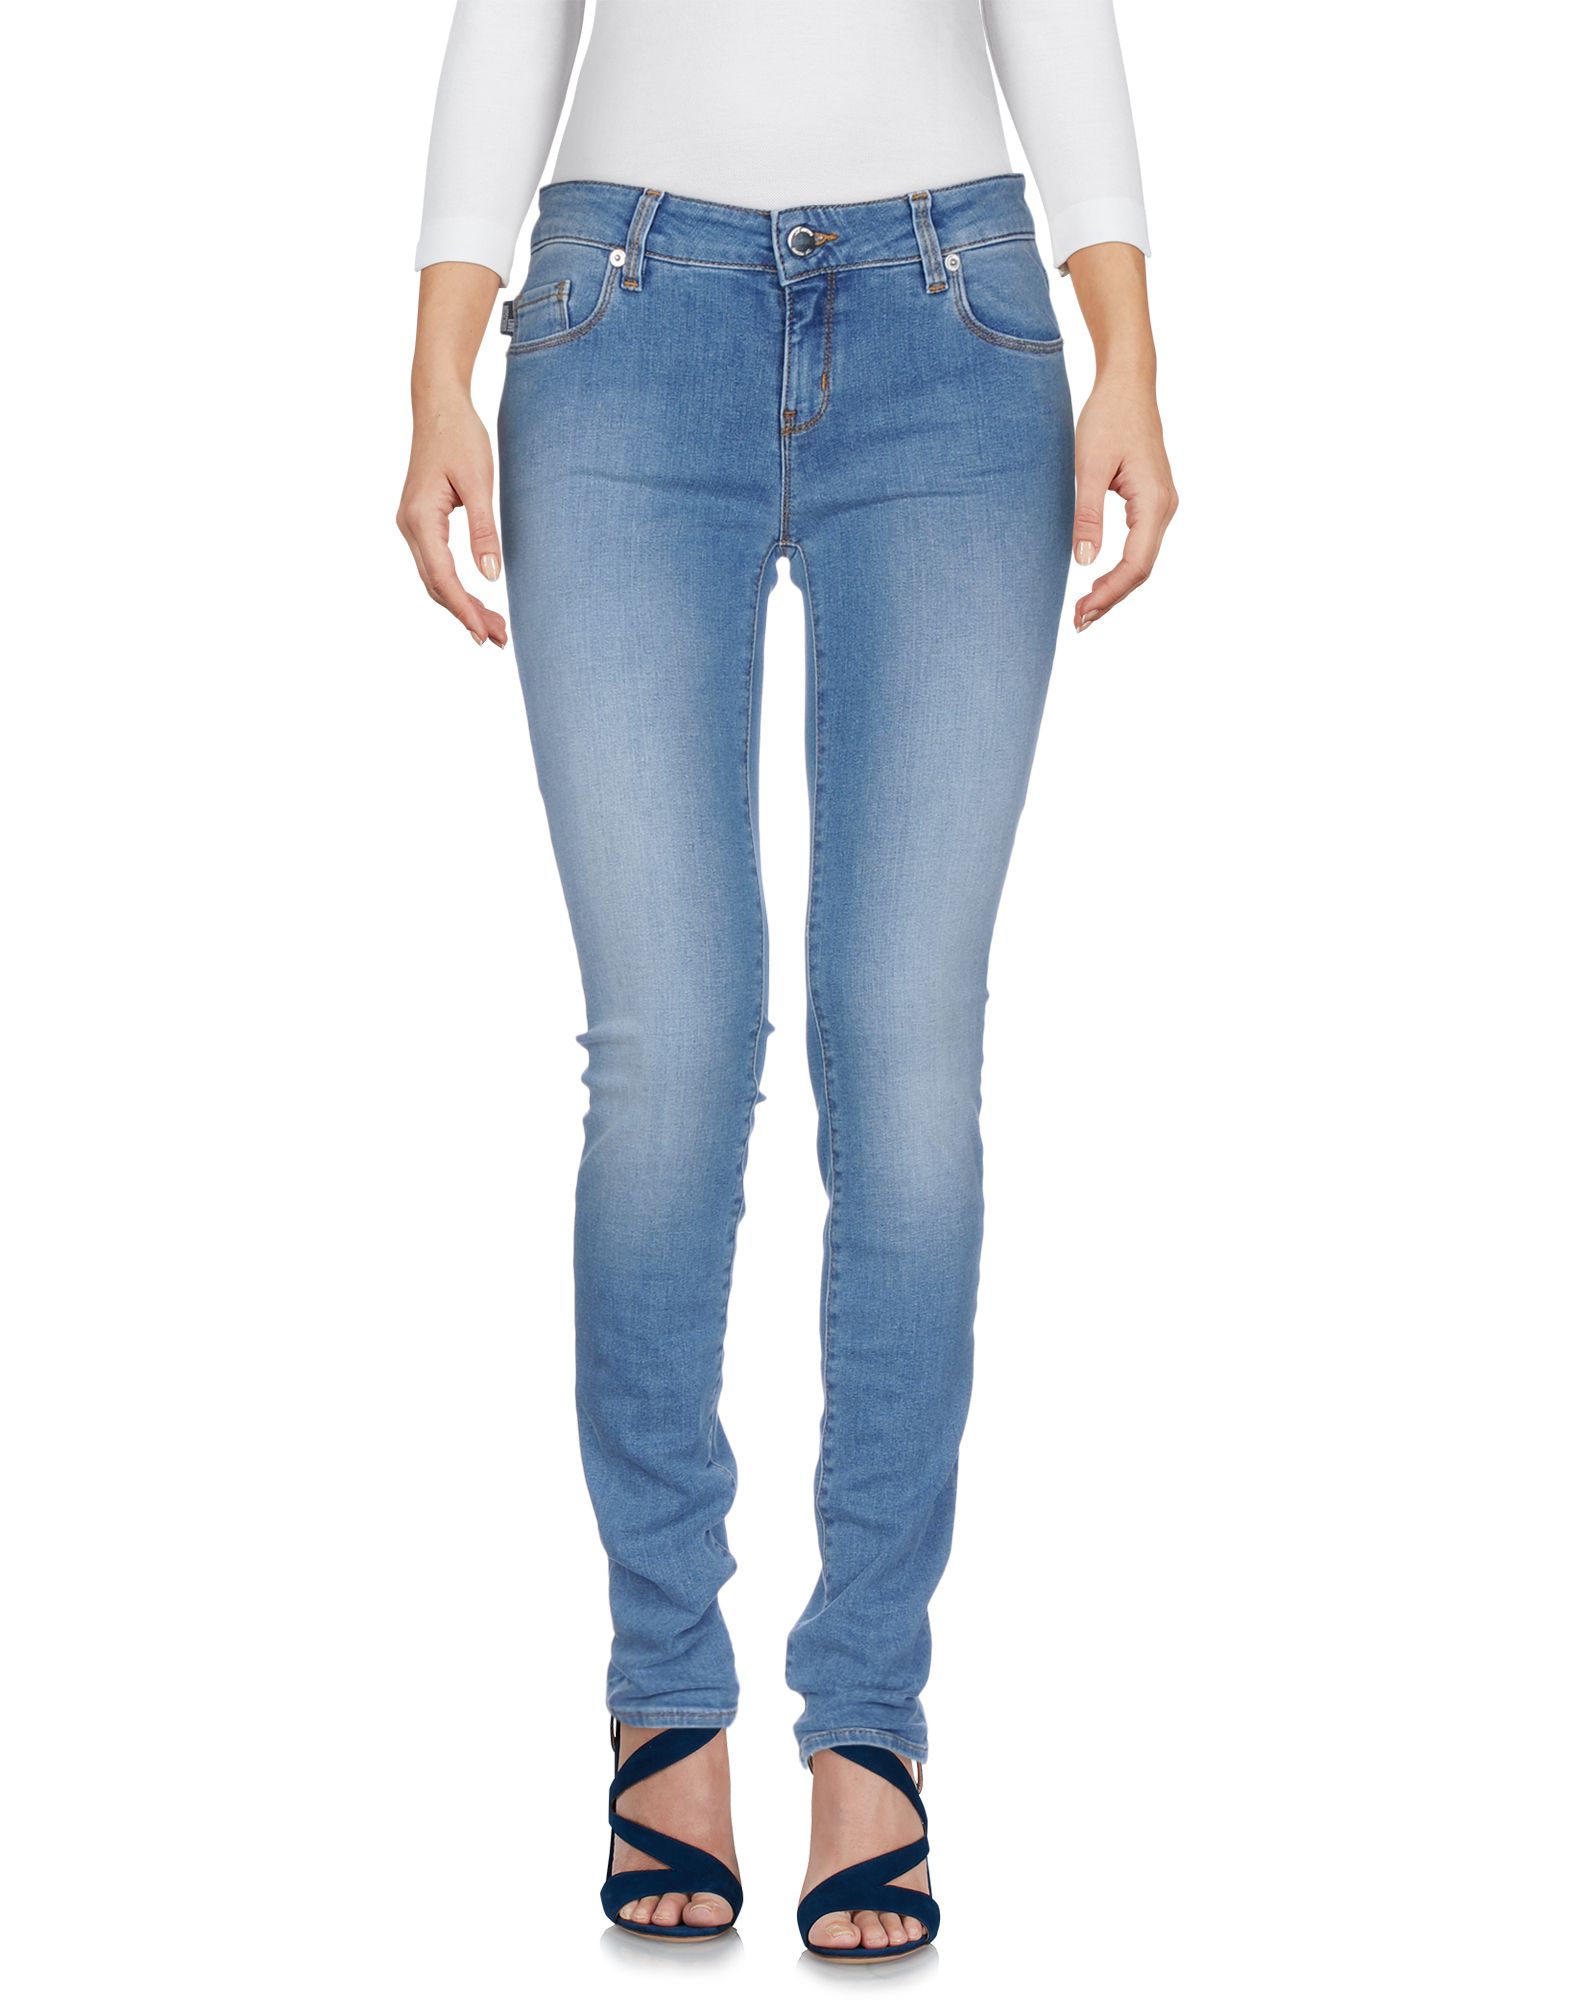 LOVE MOSCHINO JEANS,42665909EH 3